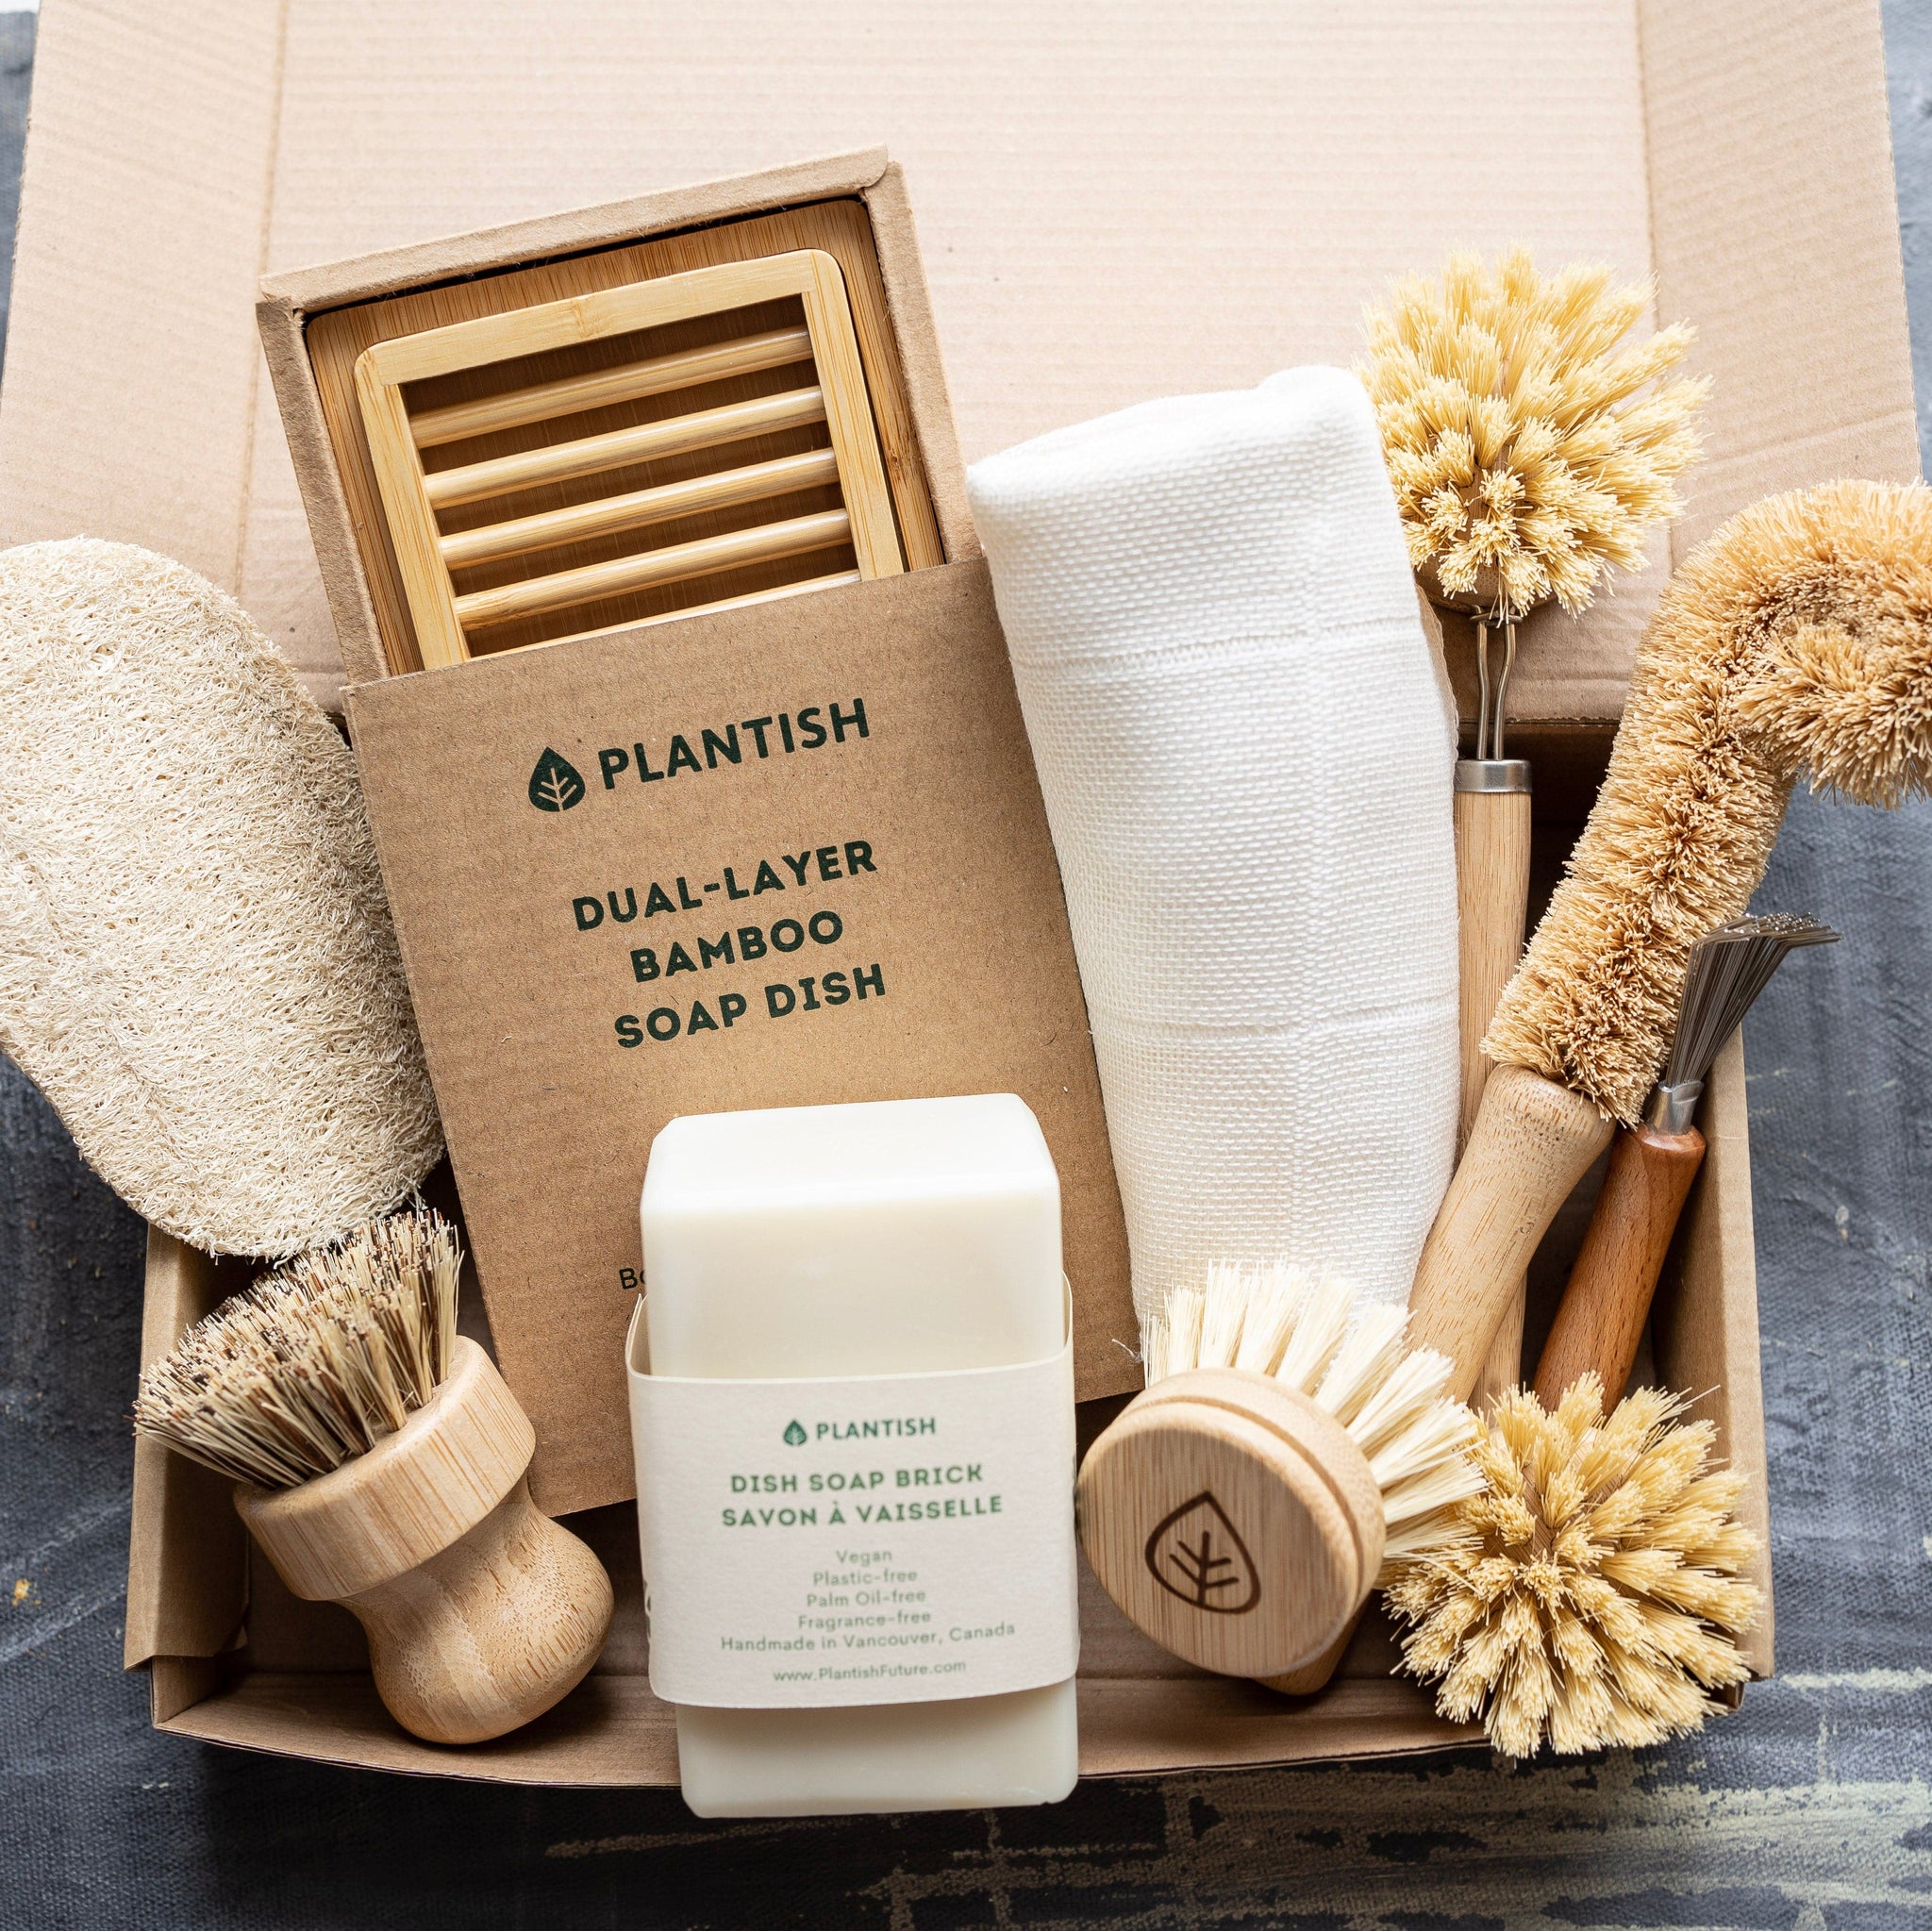 This extra large kit has all the plant-based home and kitchen cleaning tools.